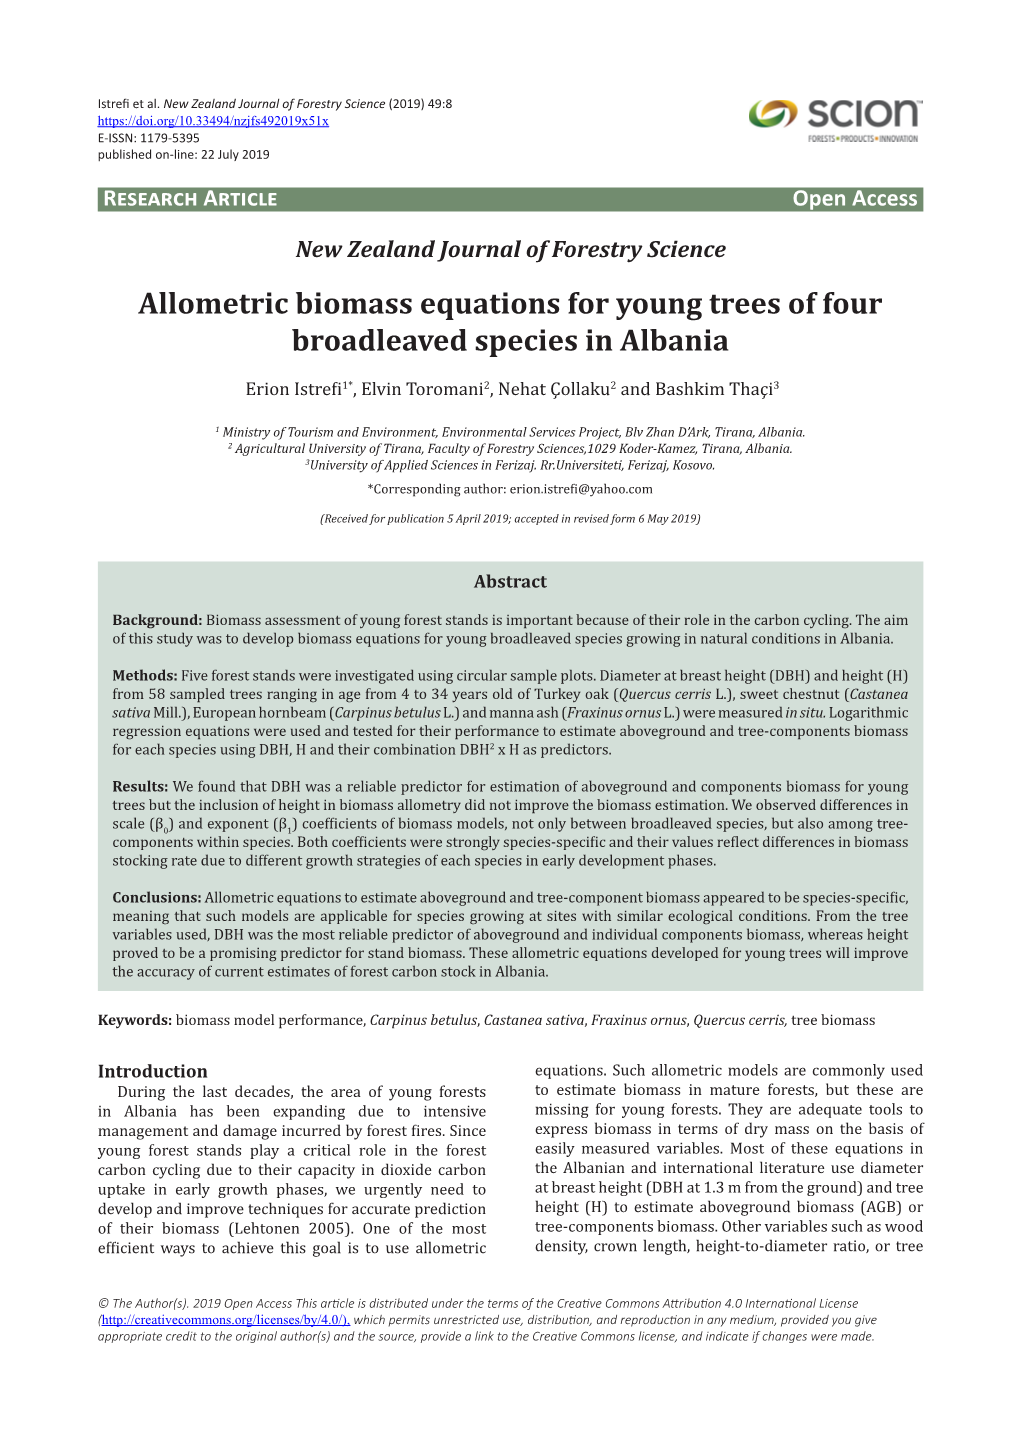 Allometric Biomass Equations for Young Trees of Four Broadleaved Species in Albania